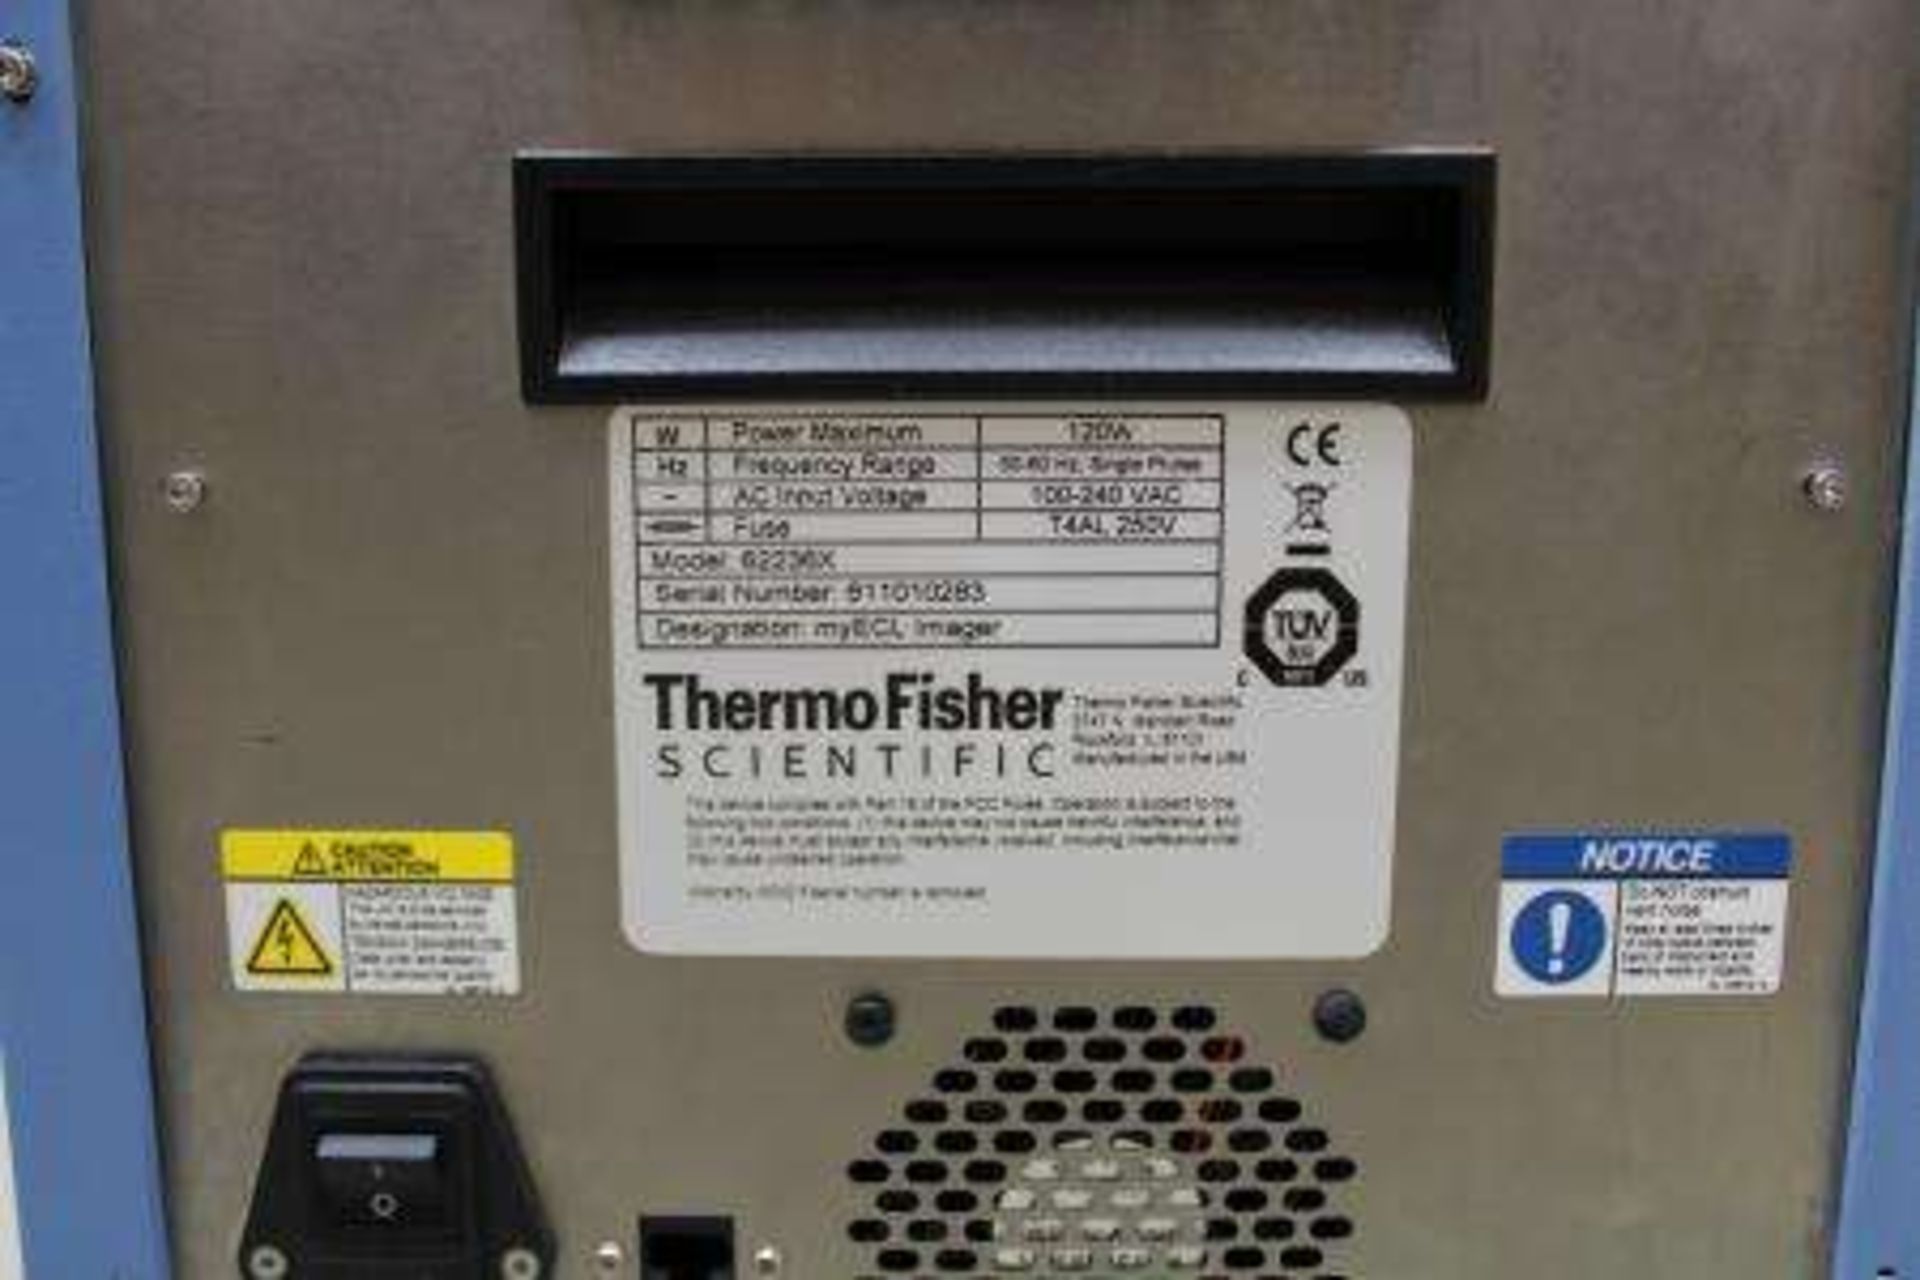 Thermo Fisher Scientific myECL Imager - Image 3 of 3